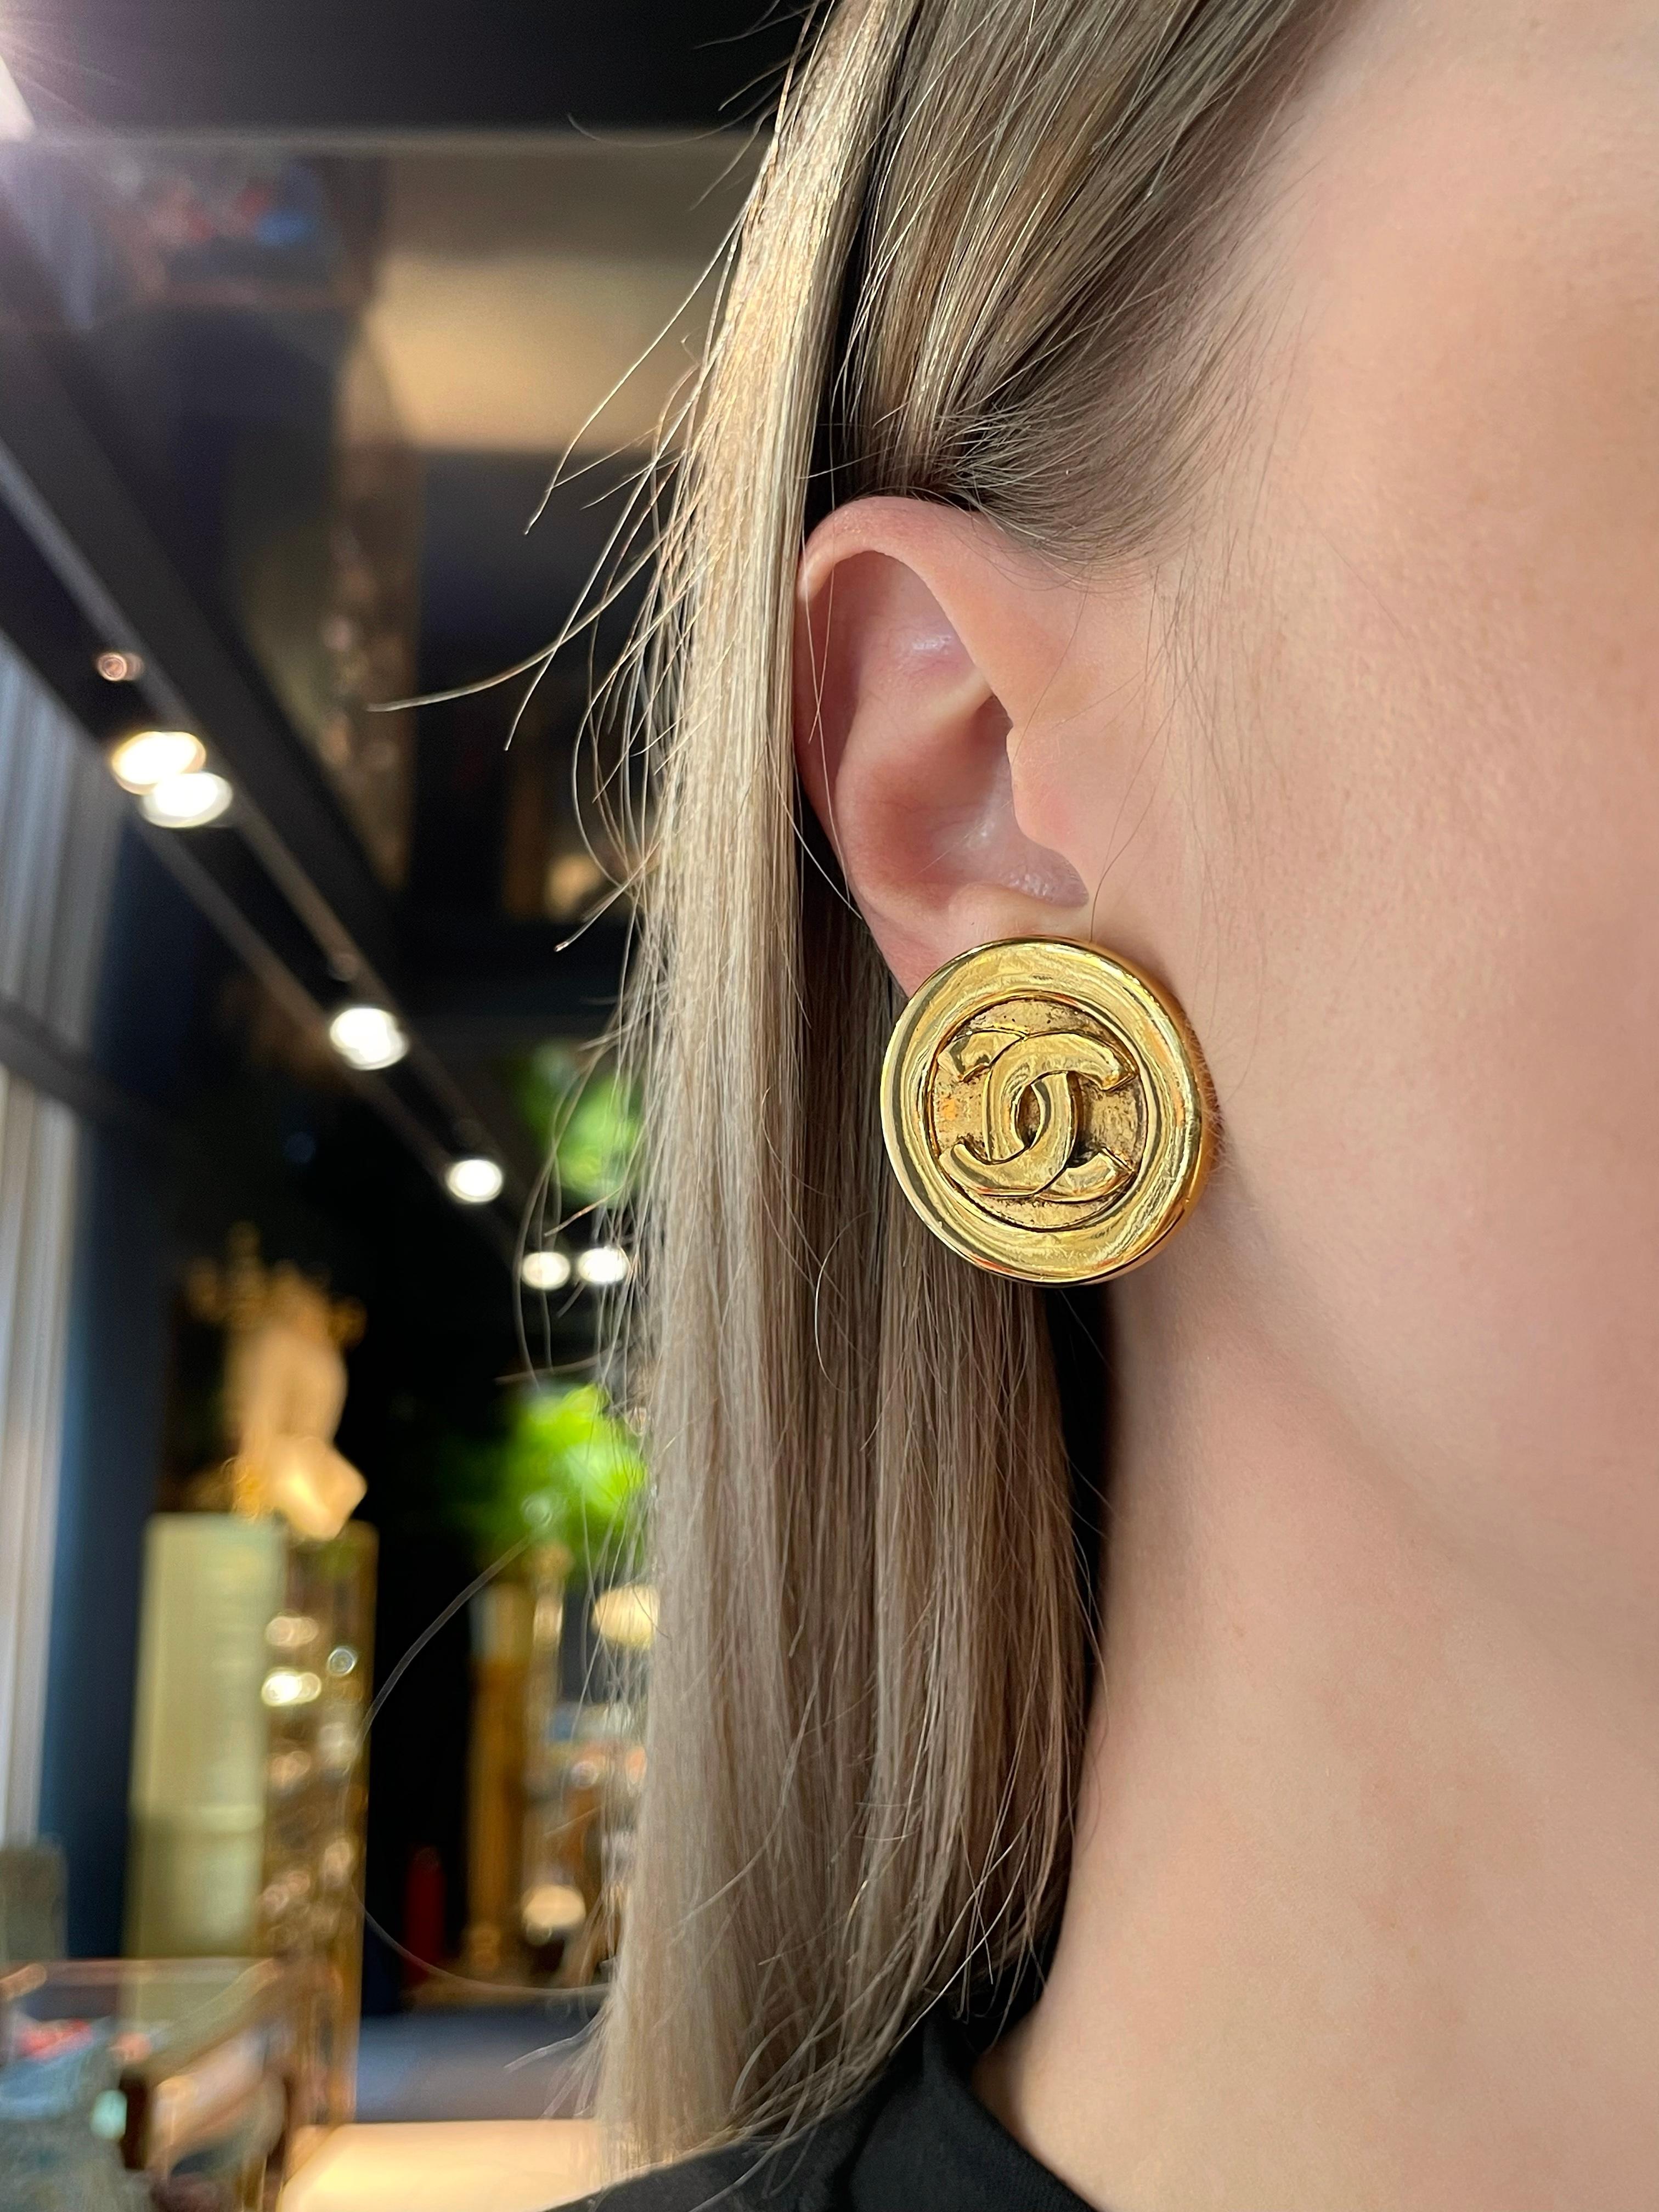 This is a classic pair of CC logo round clip on earrings. The piece is designed by Chanel in 1980s. 

It is crafted in base metal and is gold plated. 

Signed: “© Chanel ® Made in France”
Serial number: 2388
Diameter: 2.8cm

———

If you have any